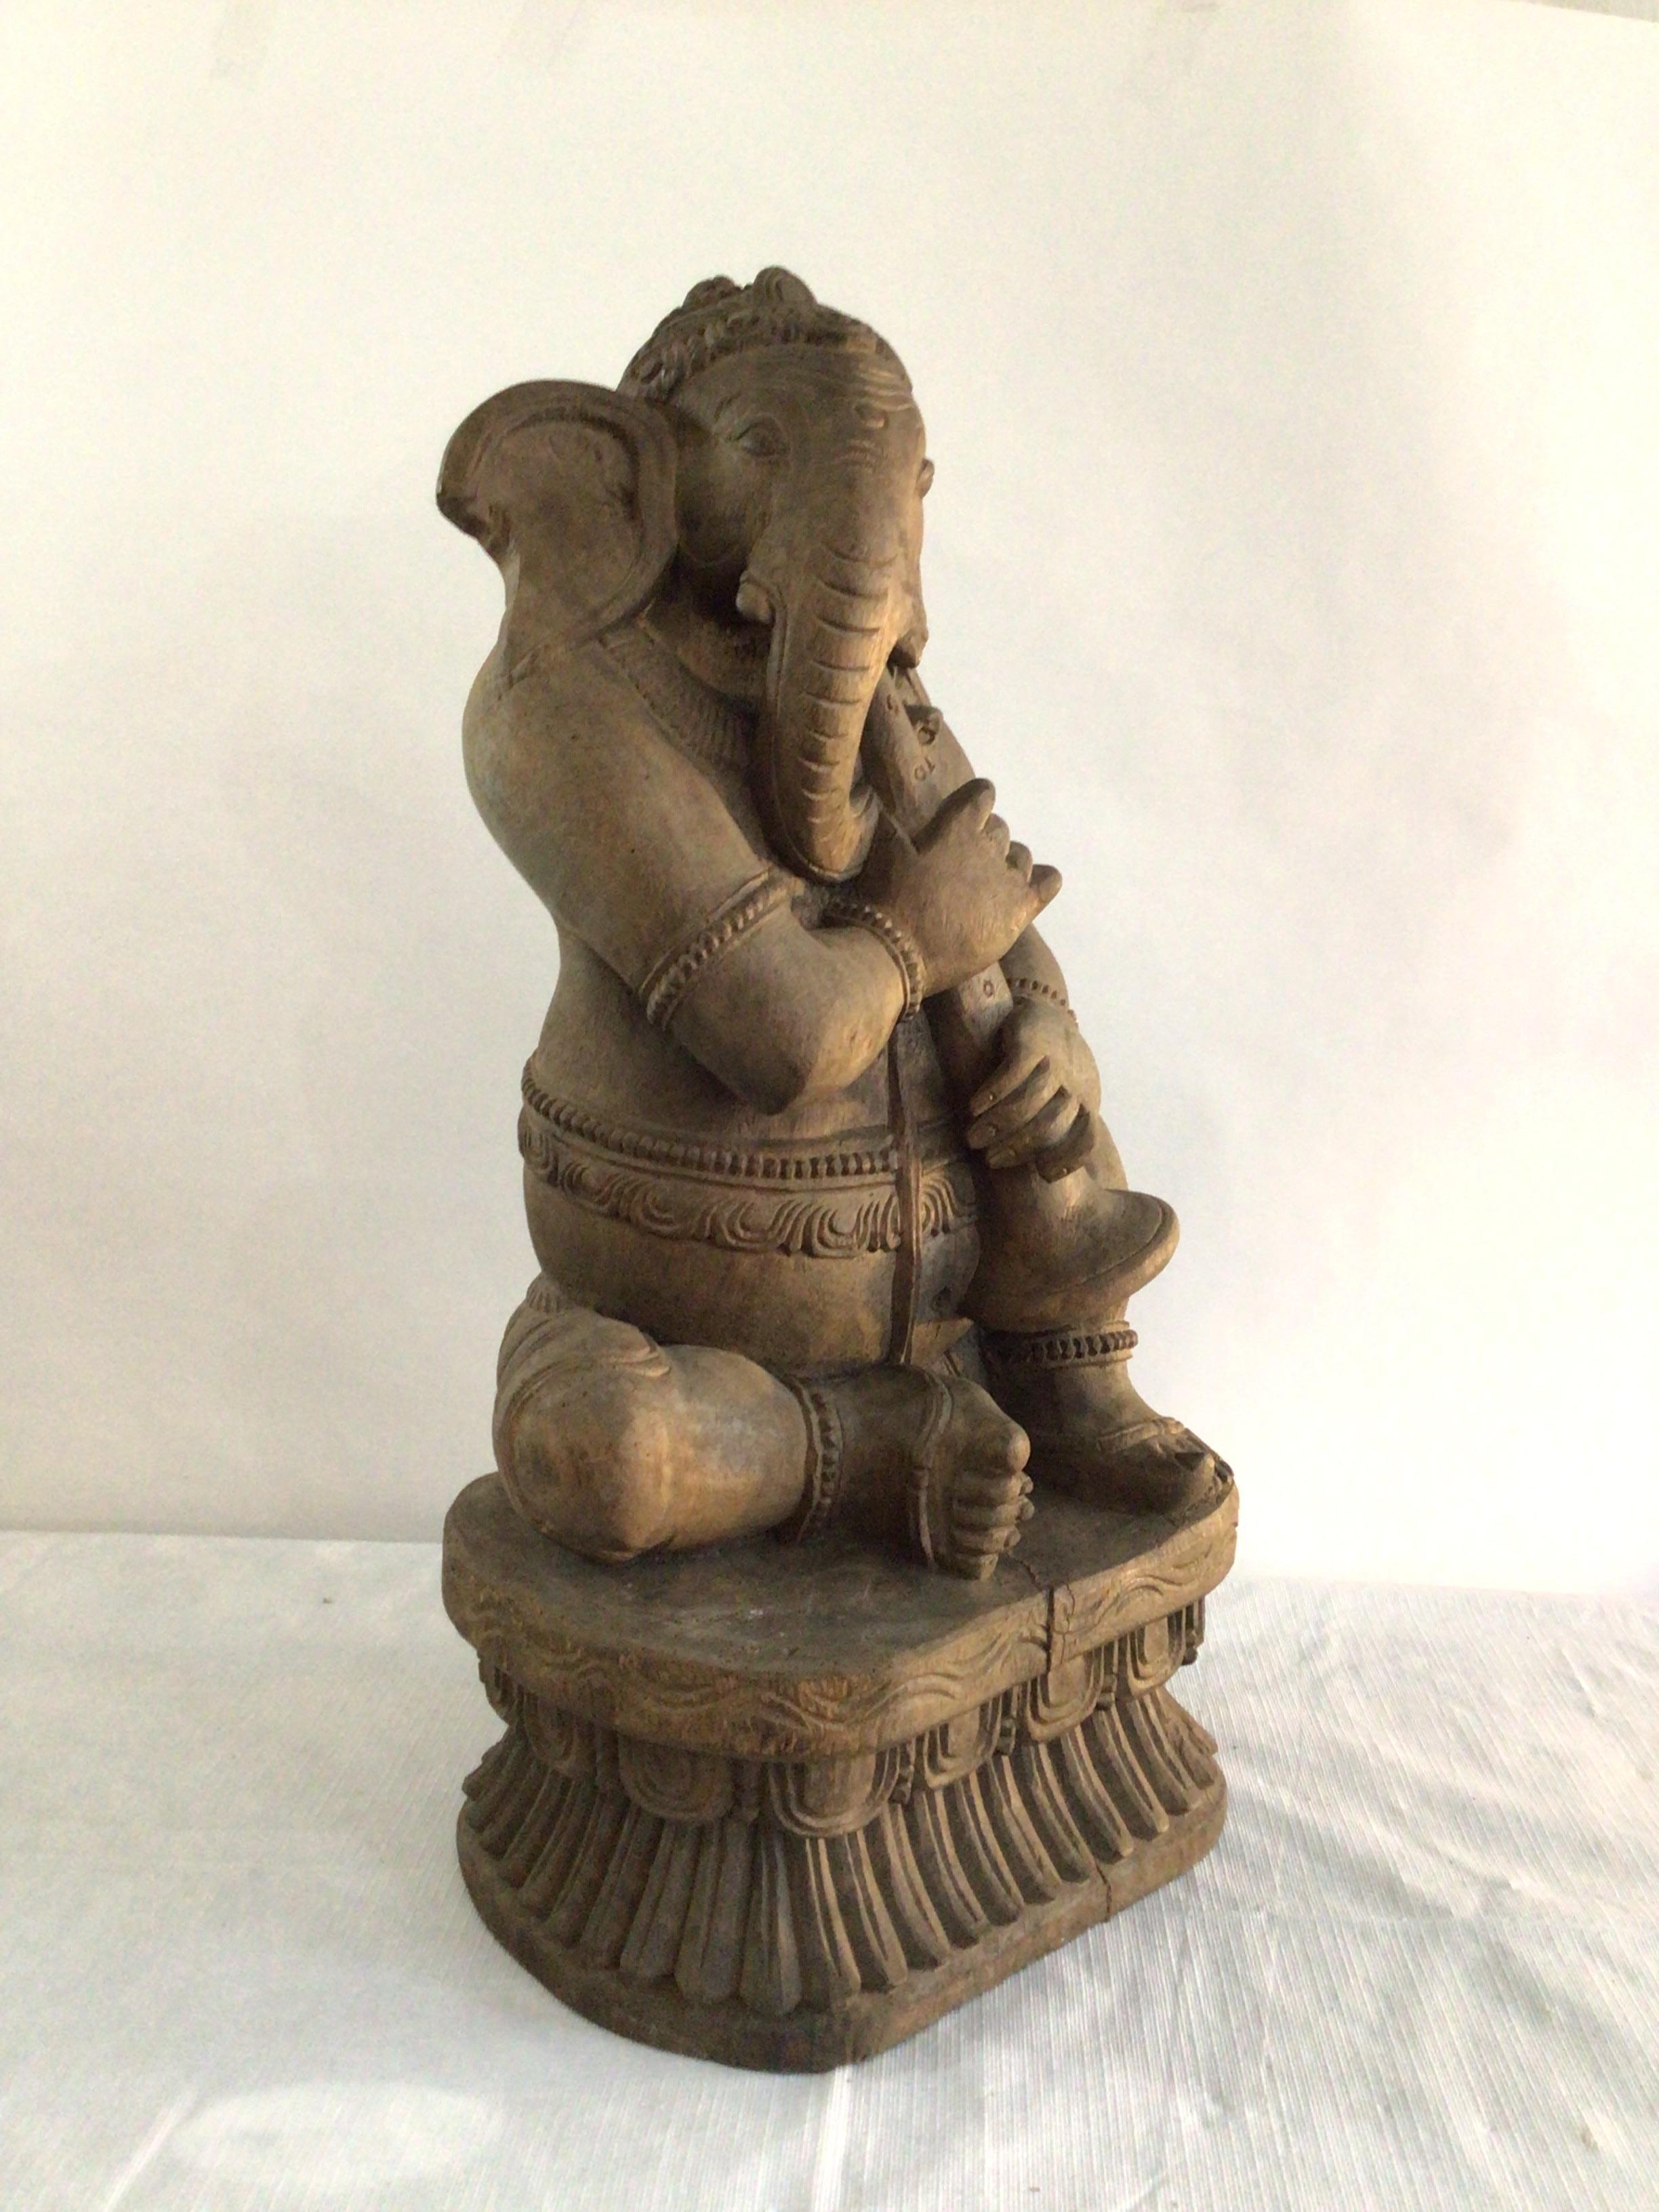 1960s Hand Carved Thailand Elephant Playing A Horn 
All Wood
Musician Ganesh / Musician Ganesha
Thailand Ganesh
Ganesh as a musician who, like Shiva, gives rhythm to the universe